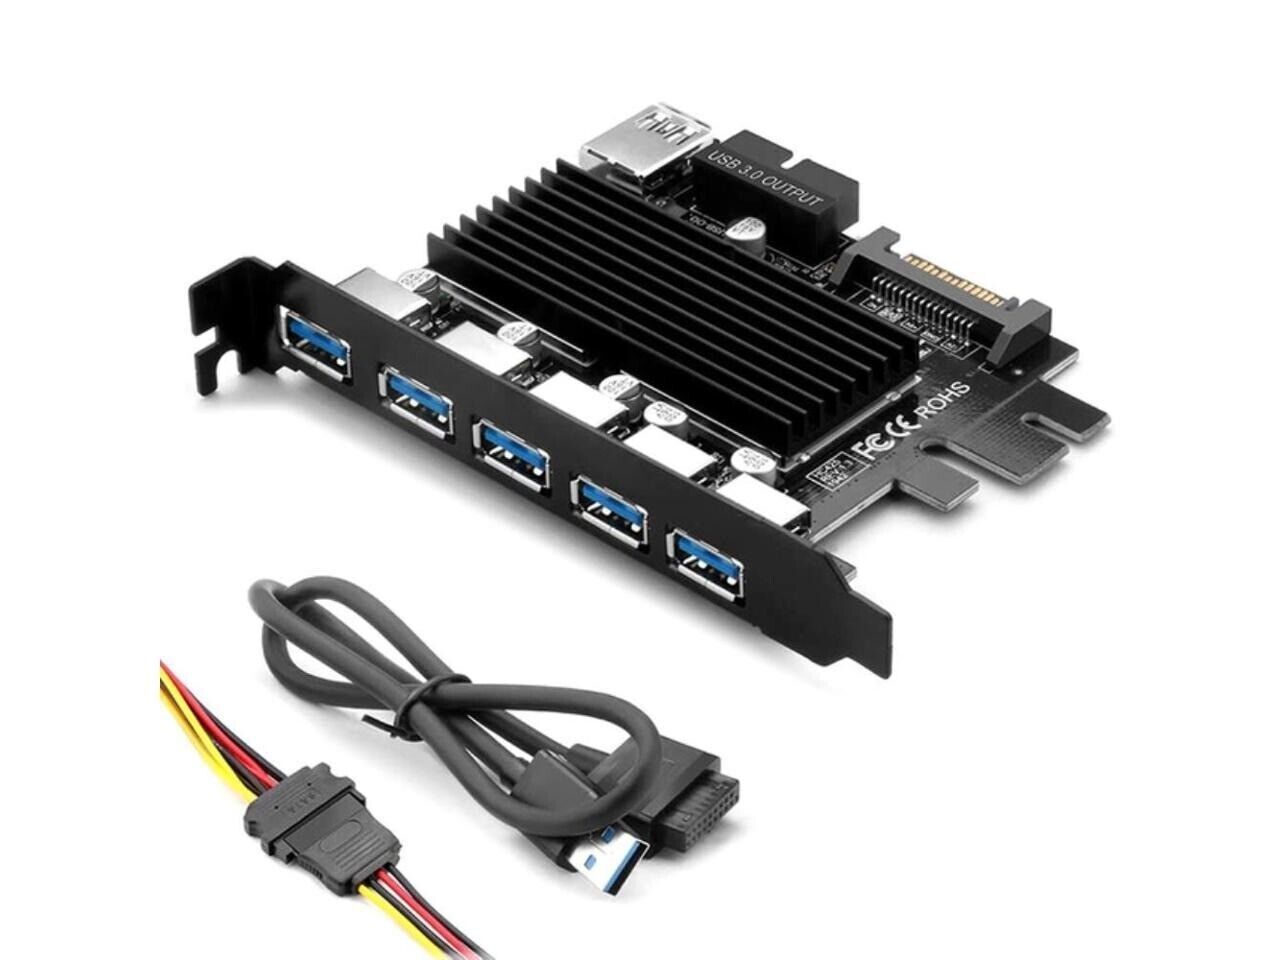 5 Ports USB 3.0 to Expansion Card-5 USB 3.0 Cards with 15-Pin SATA